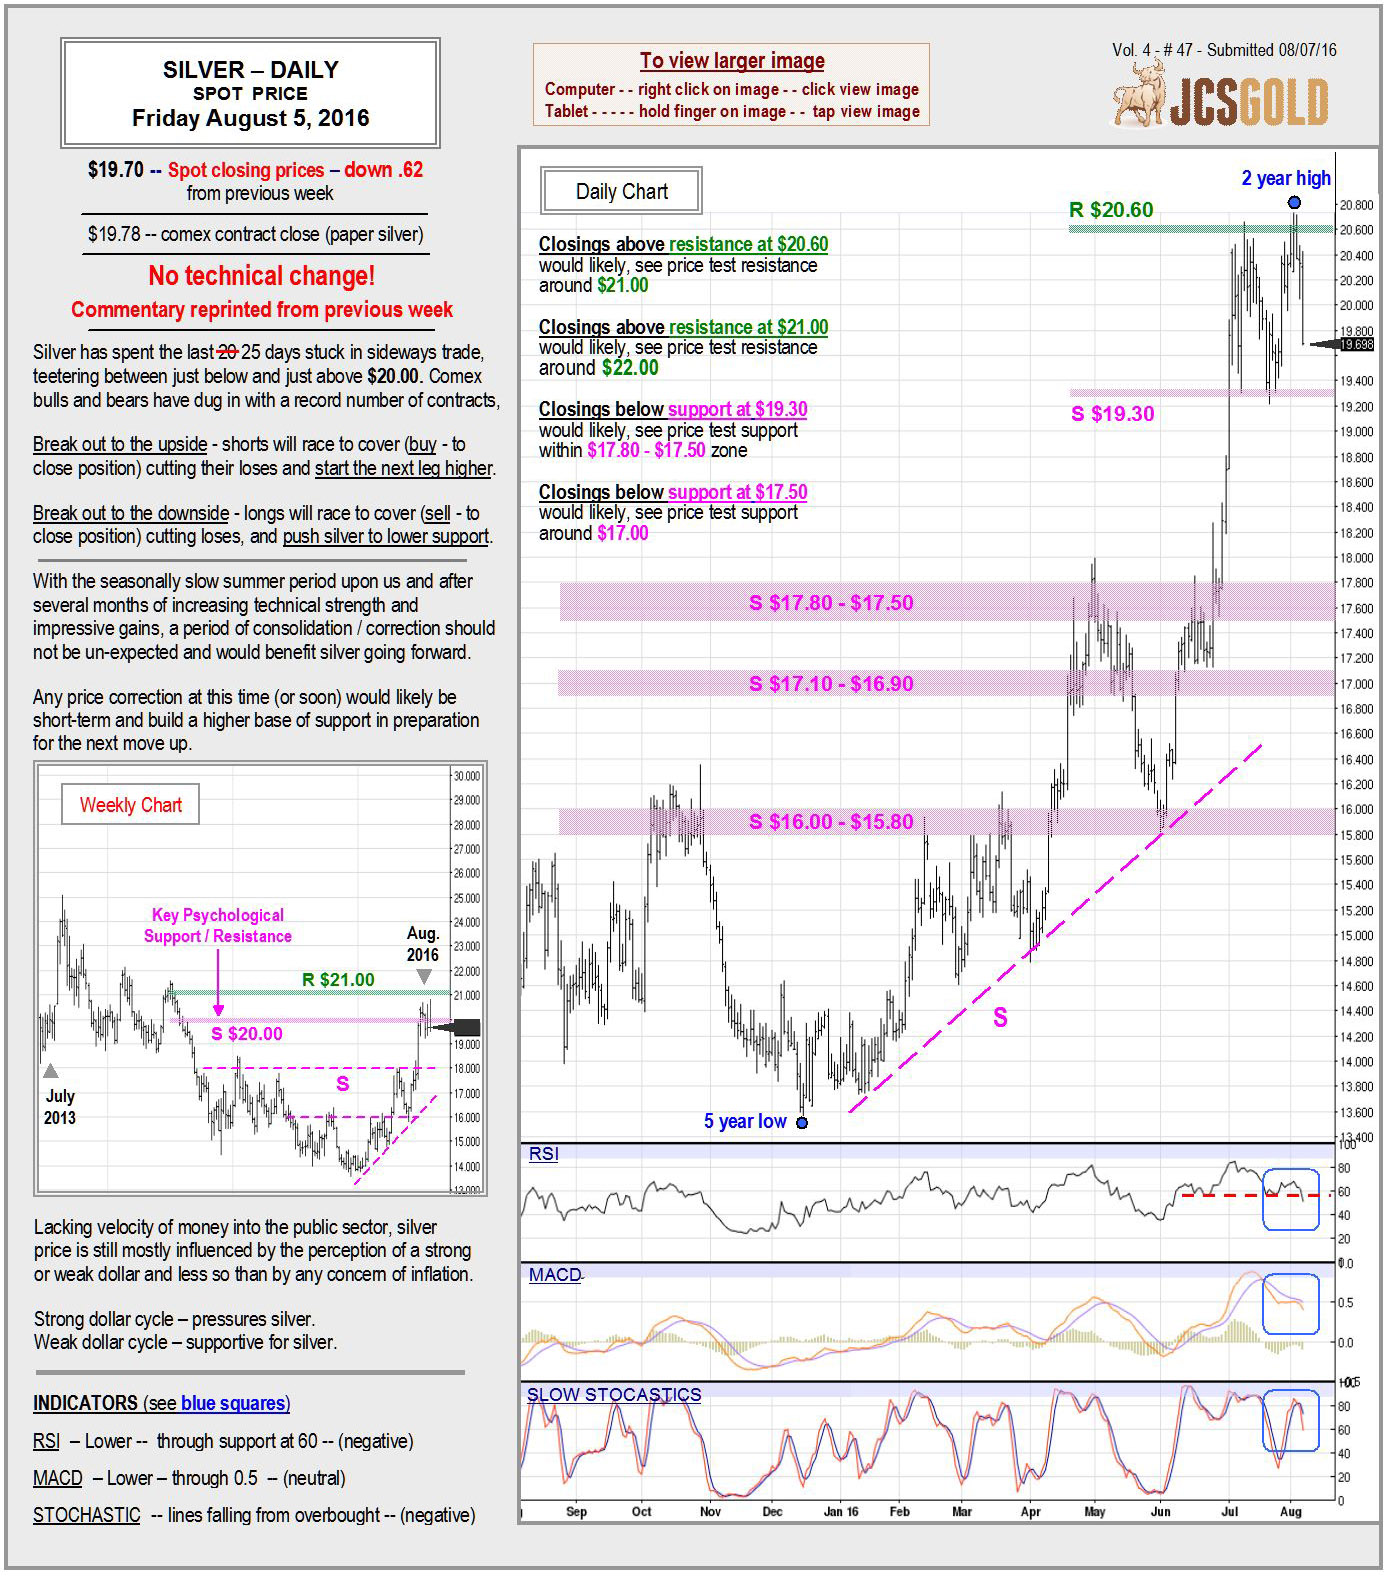 August 5, 2016 chart & commentary